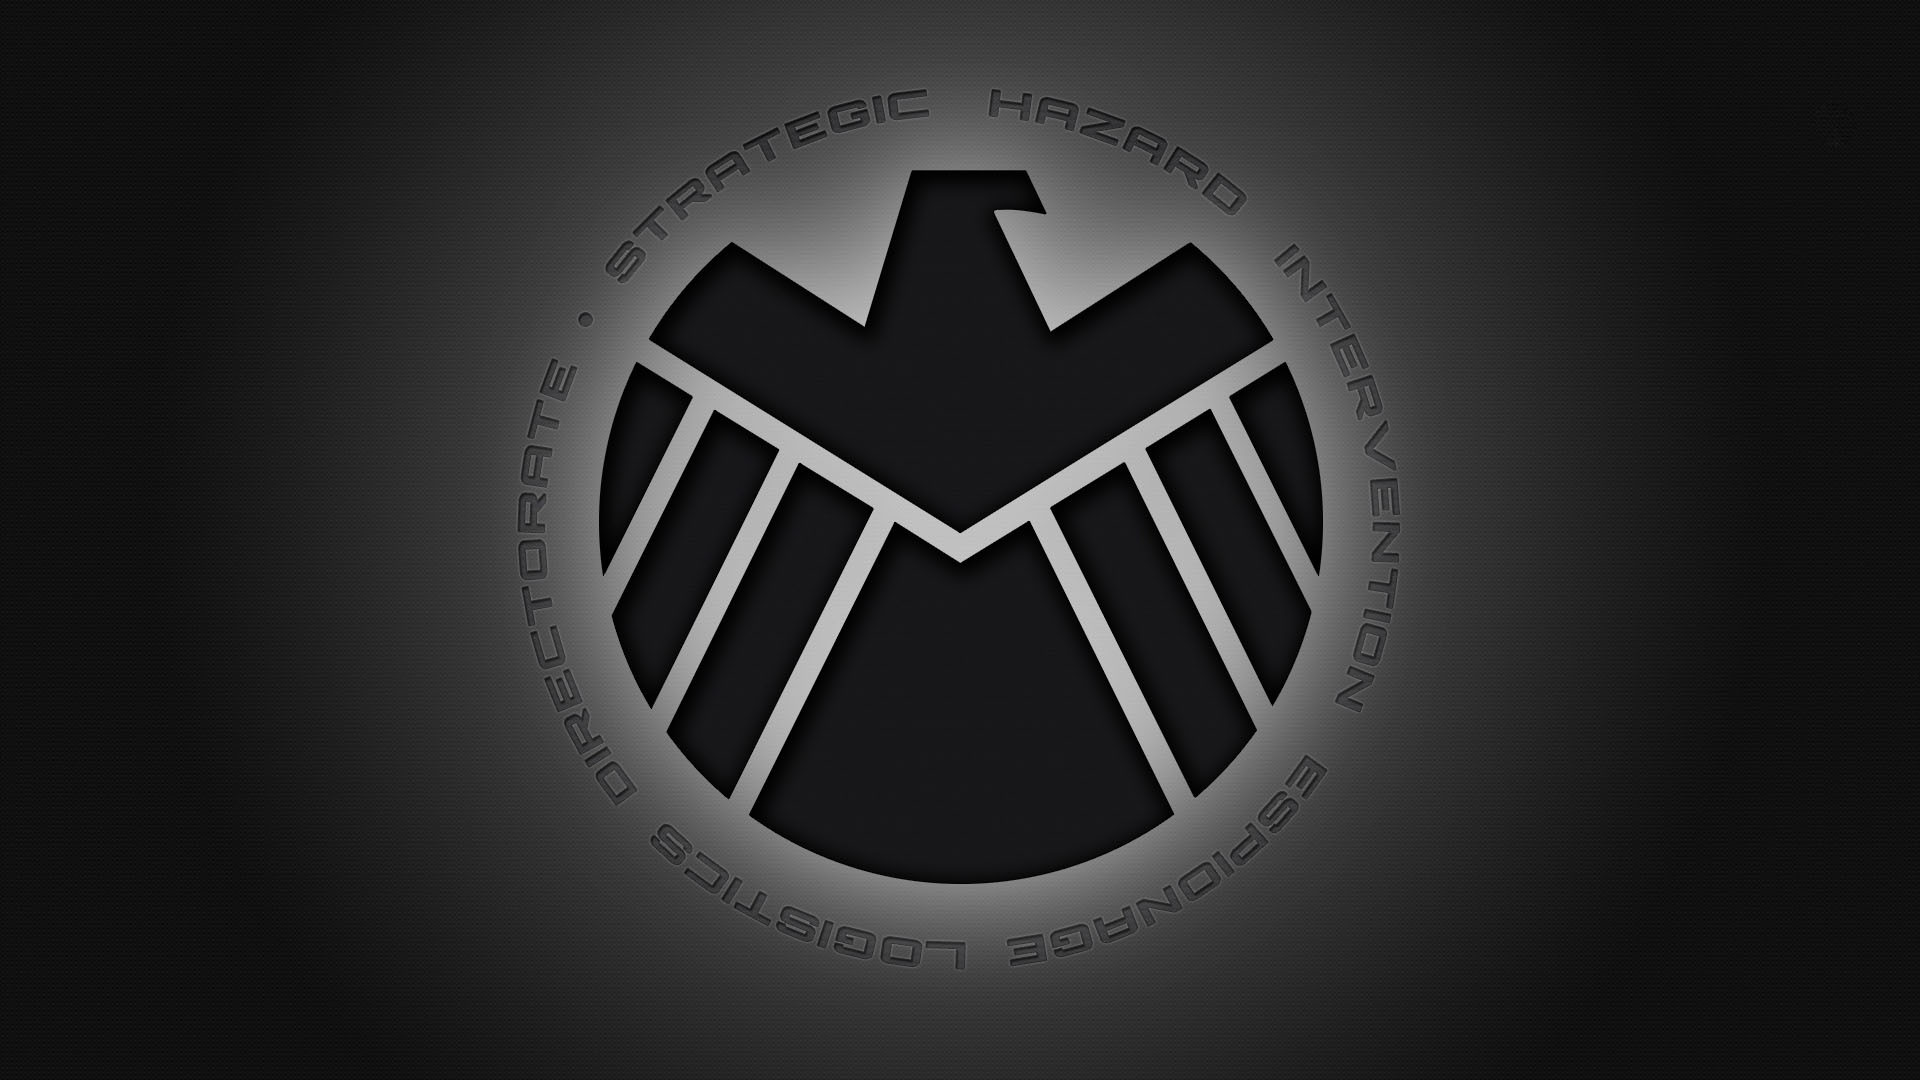 Agents Of S.H.I.E.L.D Wallpapers HD Free Download For Desktop